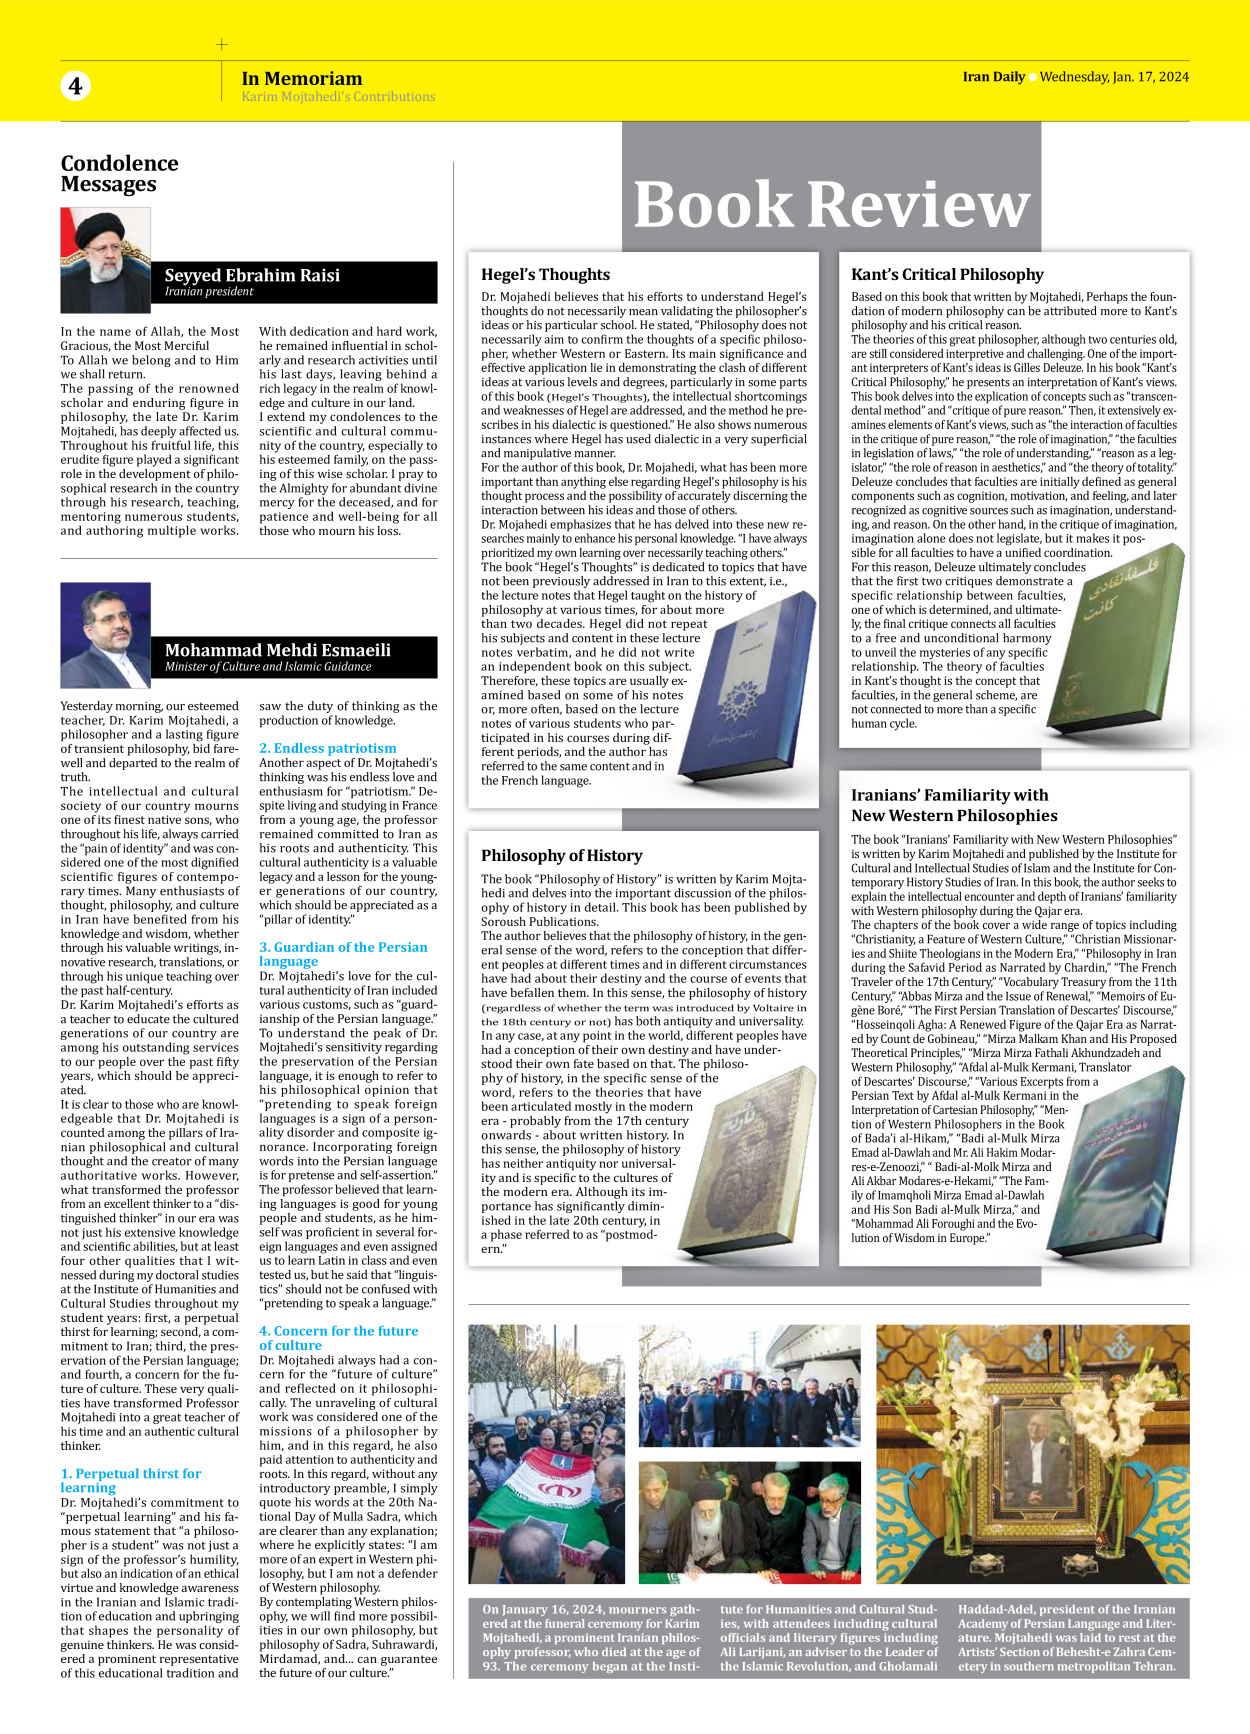 Iran Daily - The special Karim Mojtahedi’s Contributions - 17 January 2024 - Page 4